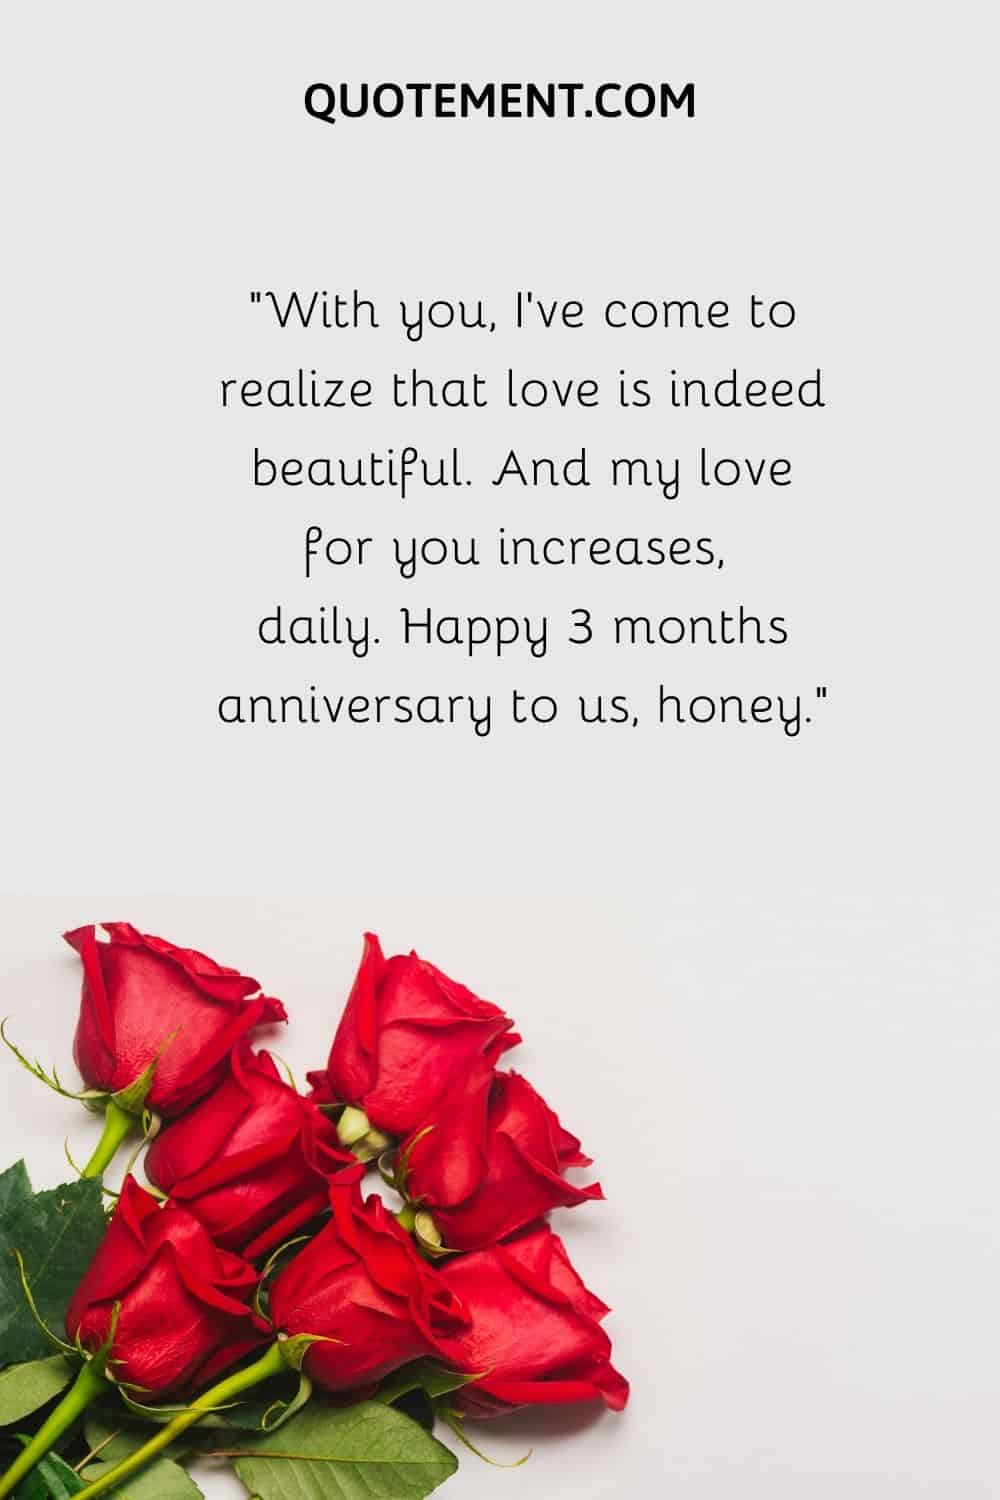 “With you, I’ve come to realize that love is indeed beautiful. And my love for you increases, daily. Happy 3 months anniversary to us, honey.”